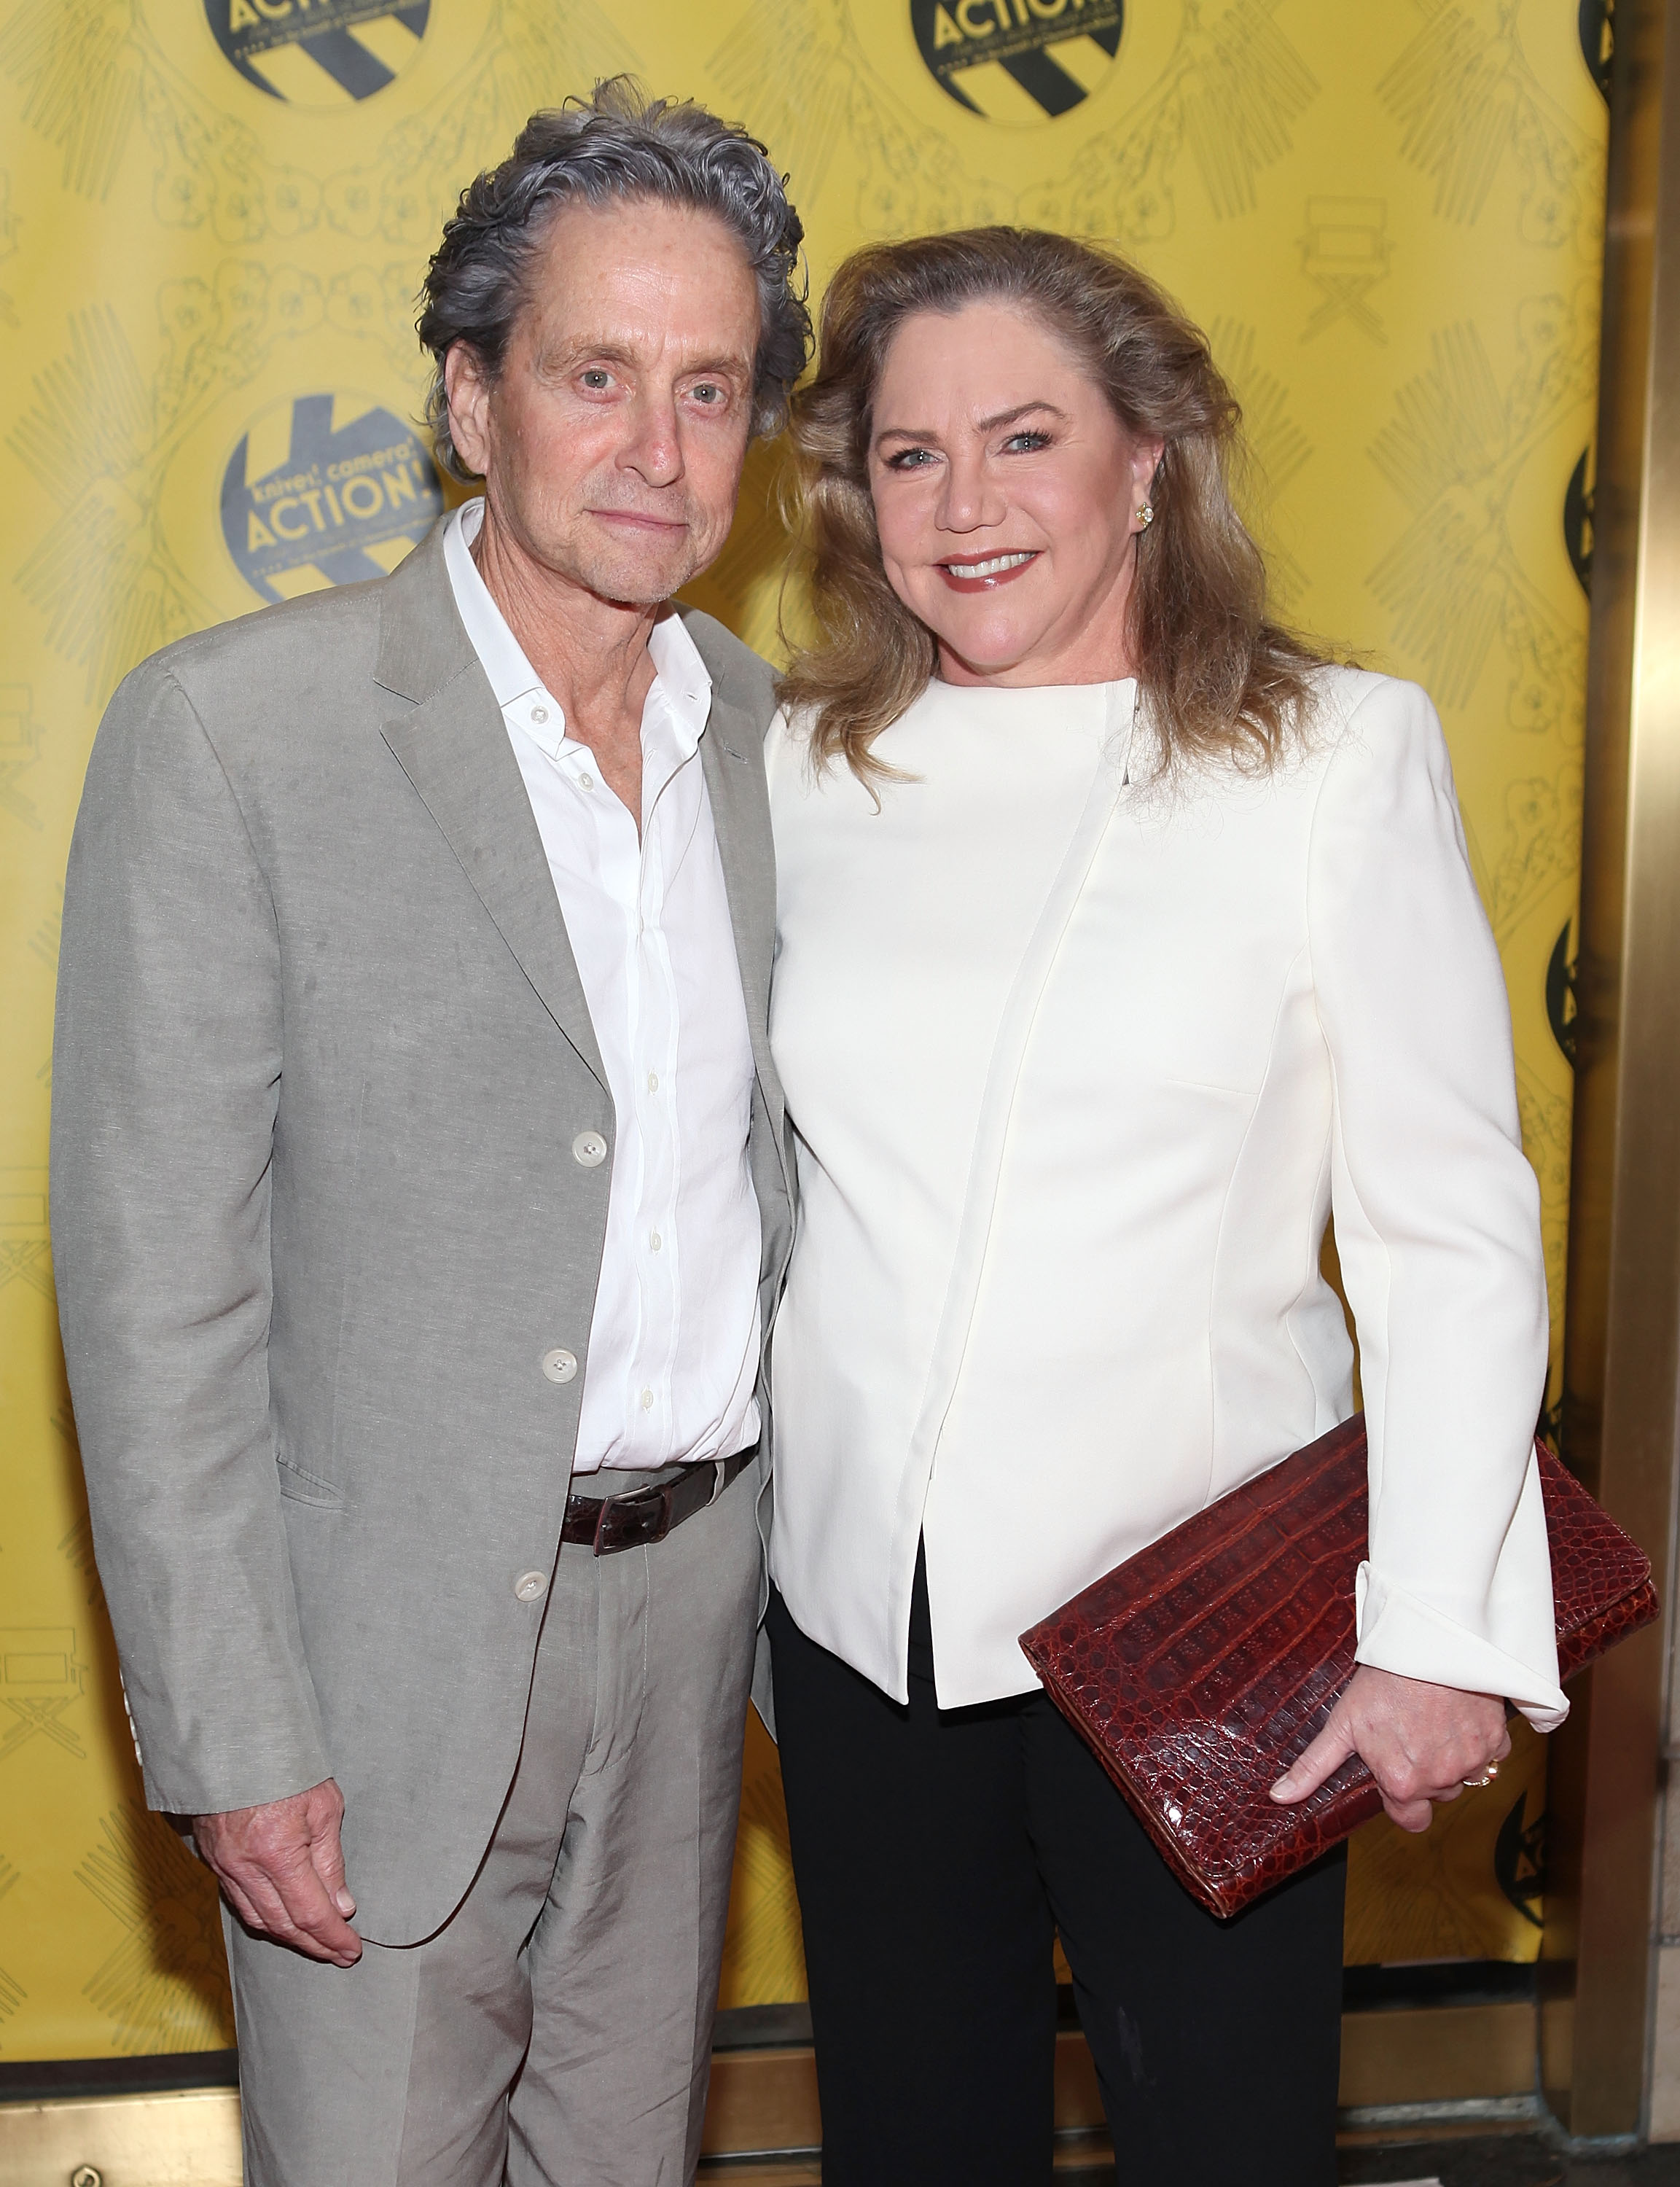 Michael Douglas and Kathleen Turner at the 27th Annual "Chefs' Tribute to Citymeals-On-Wheels" Benefit in New York City on June 4, 2012 | Source: Getty Images